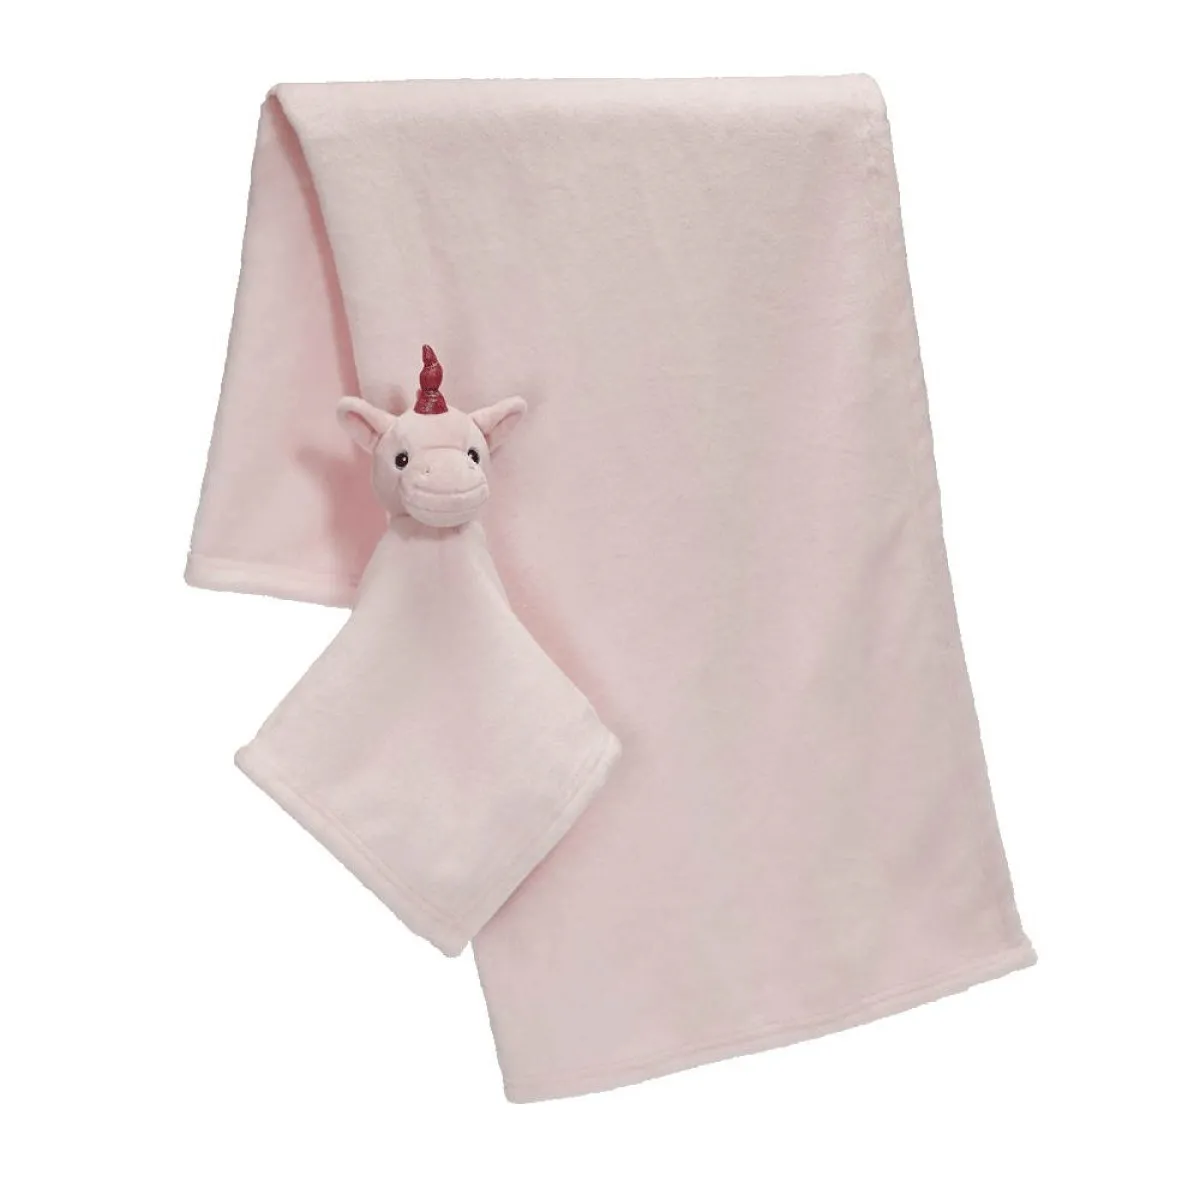 Baby blanket in pink with unicorn cuddle cloth